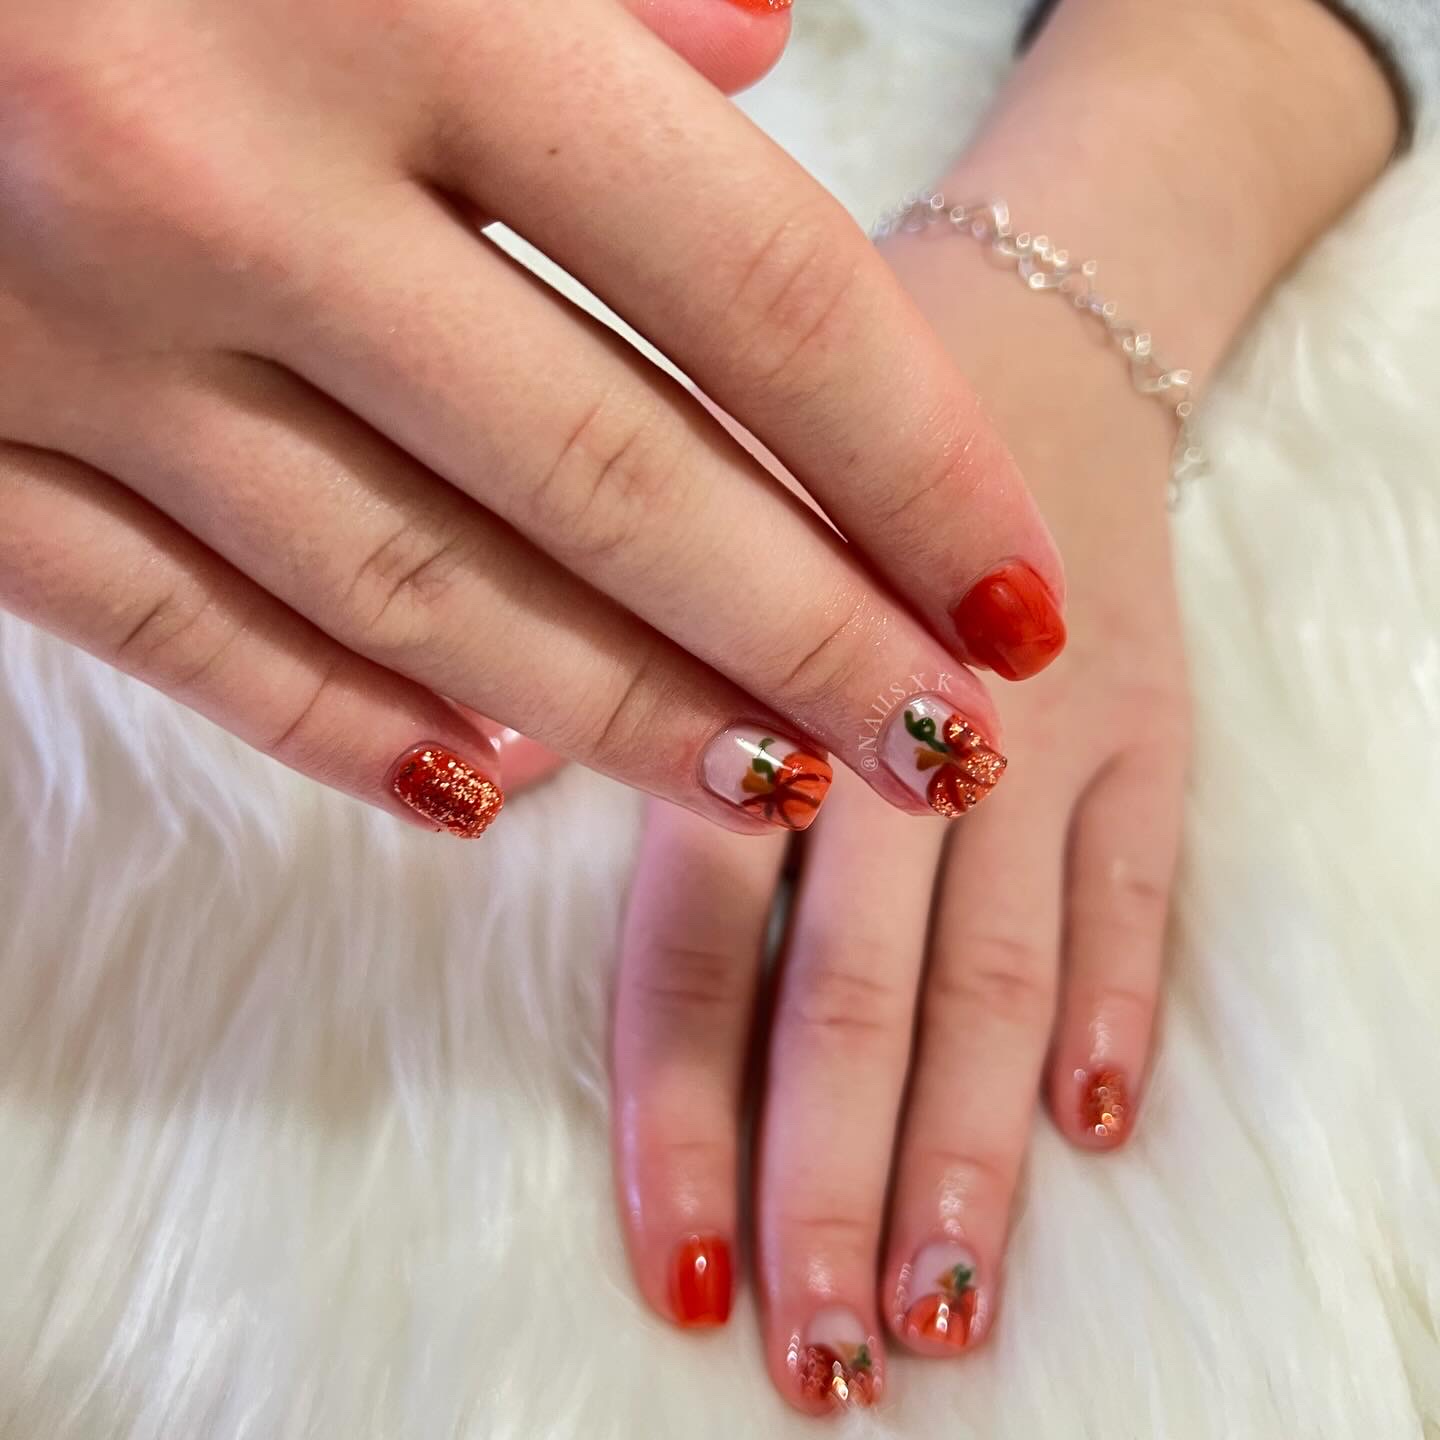 Gel manicure in a rust-orange color with hand-painted pumpkin designs and glitter accents. Nails by K